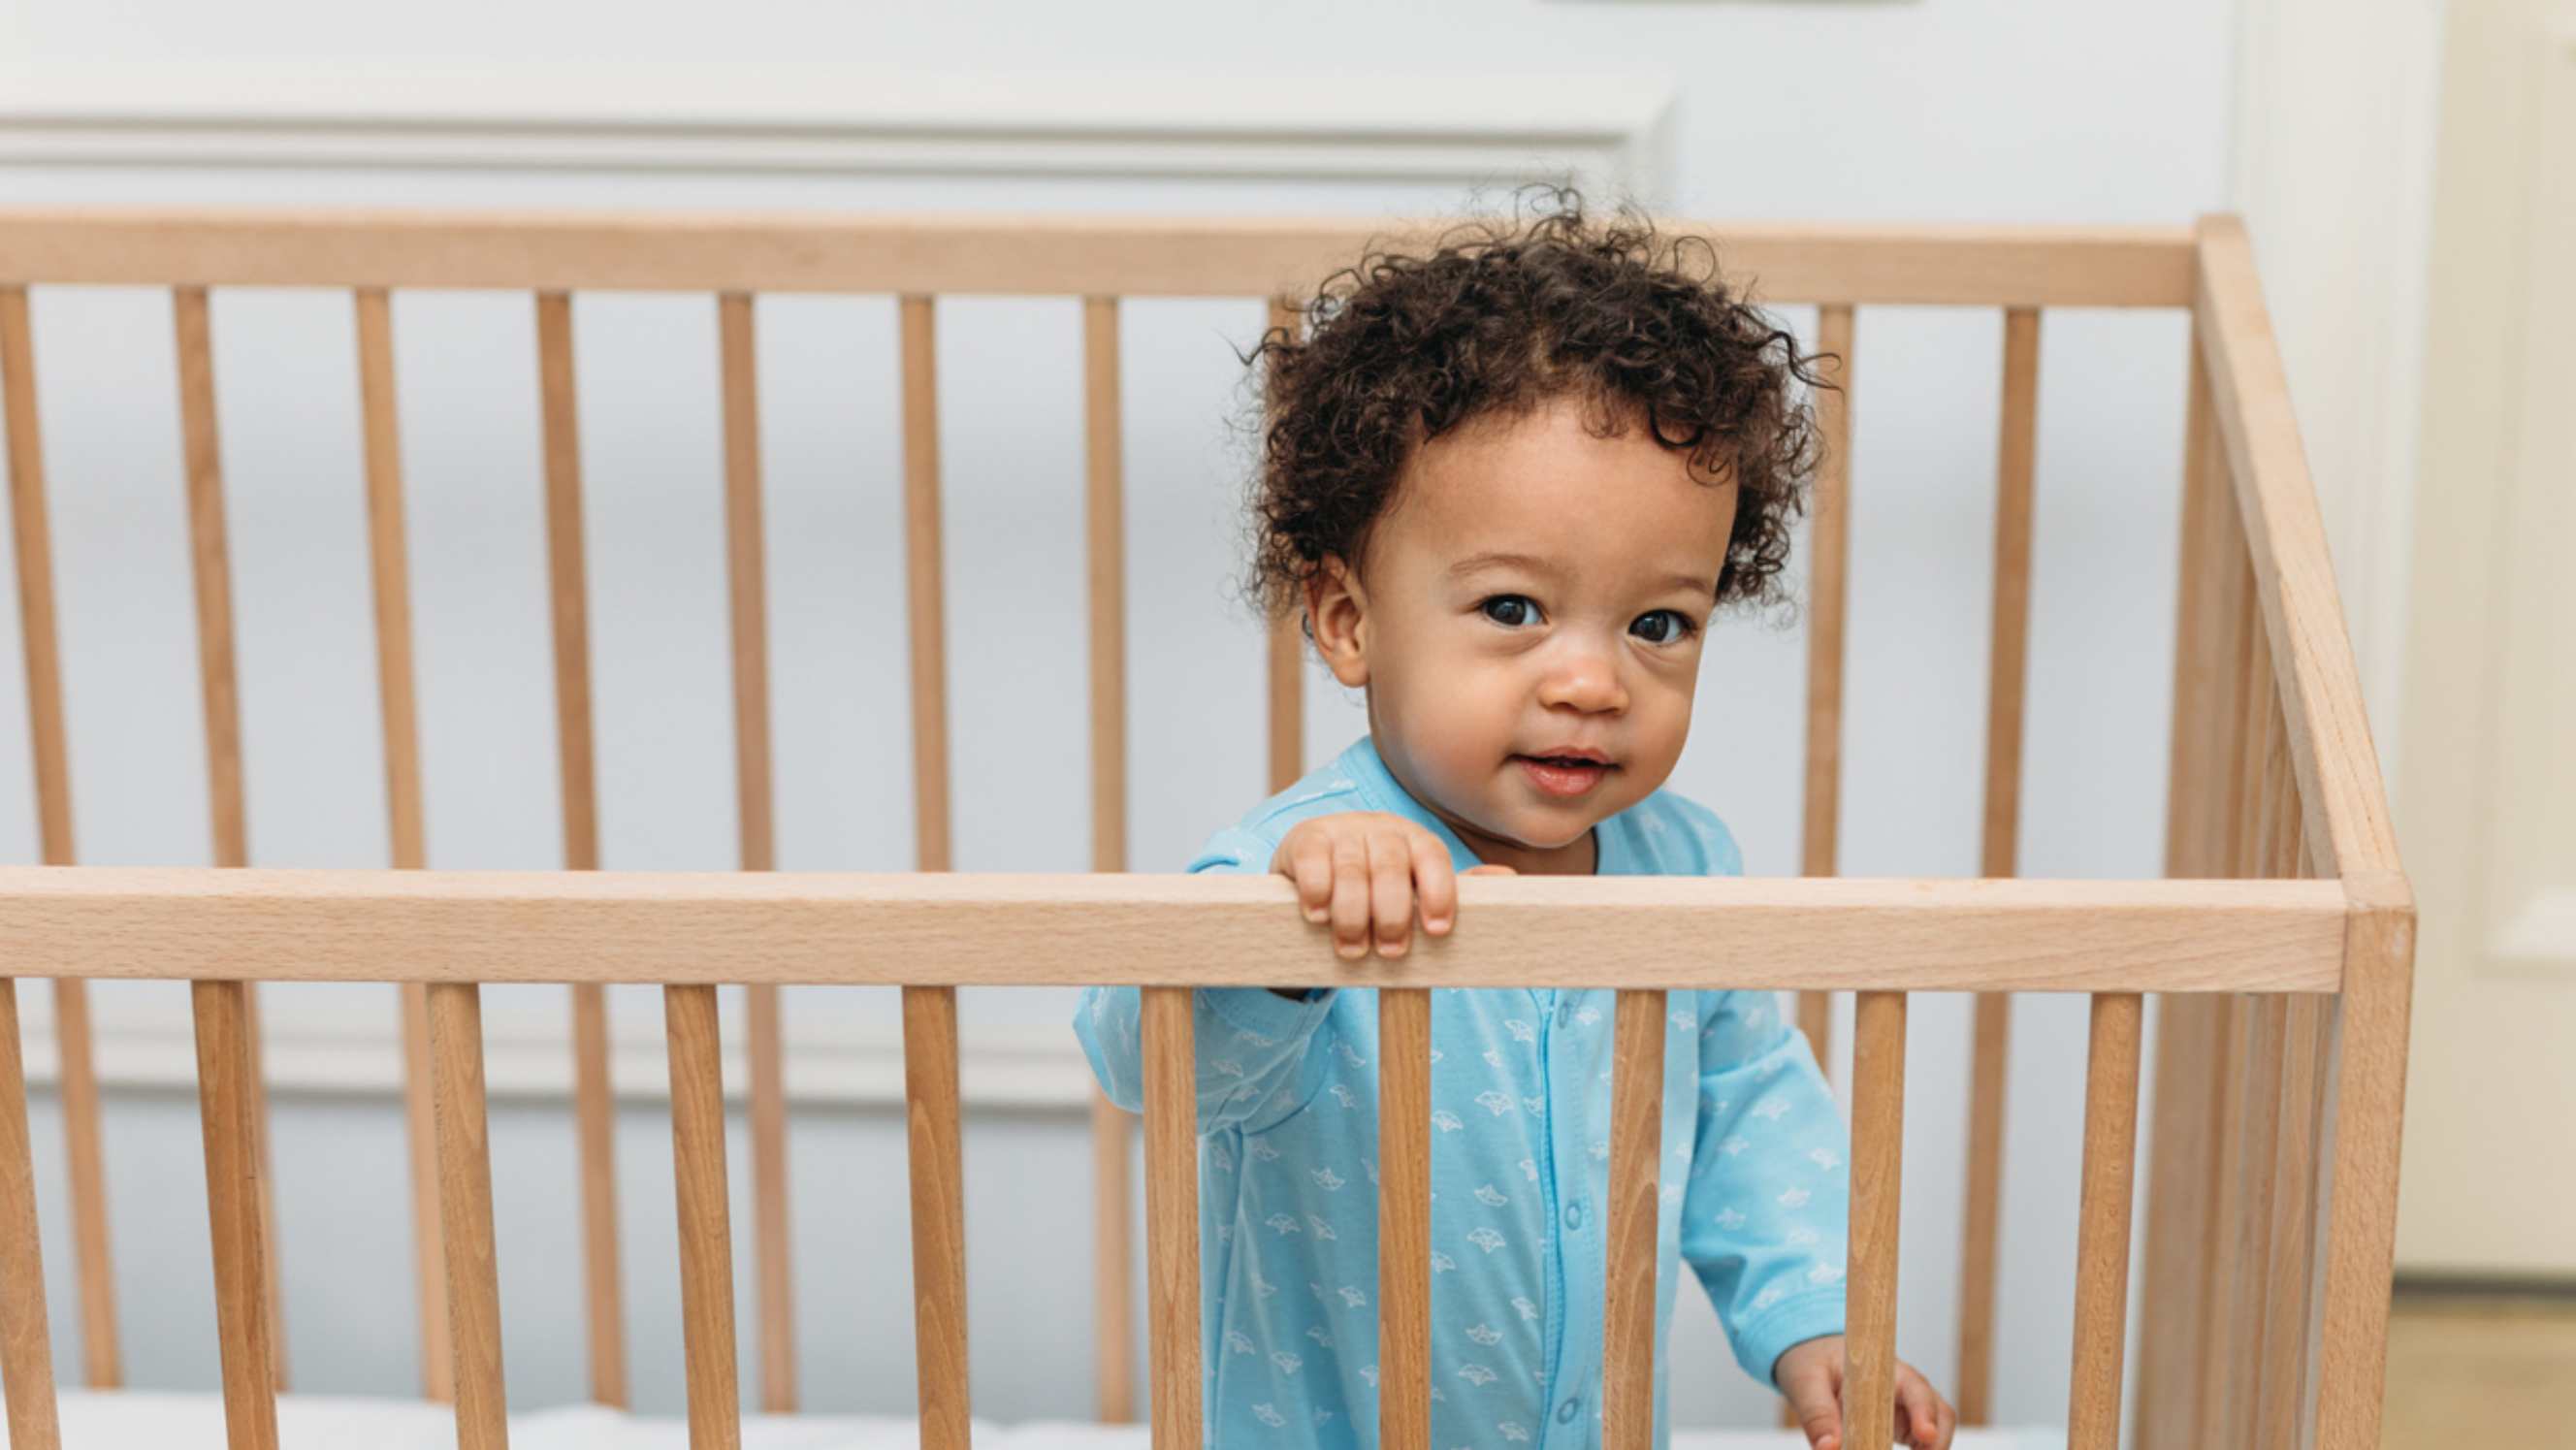 Bassinet vs cot - A smiling baby standing in a wooden cot